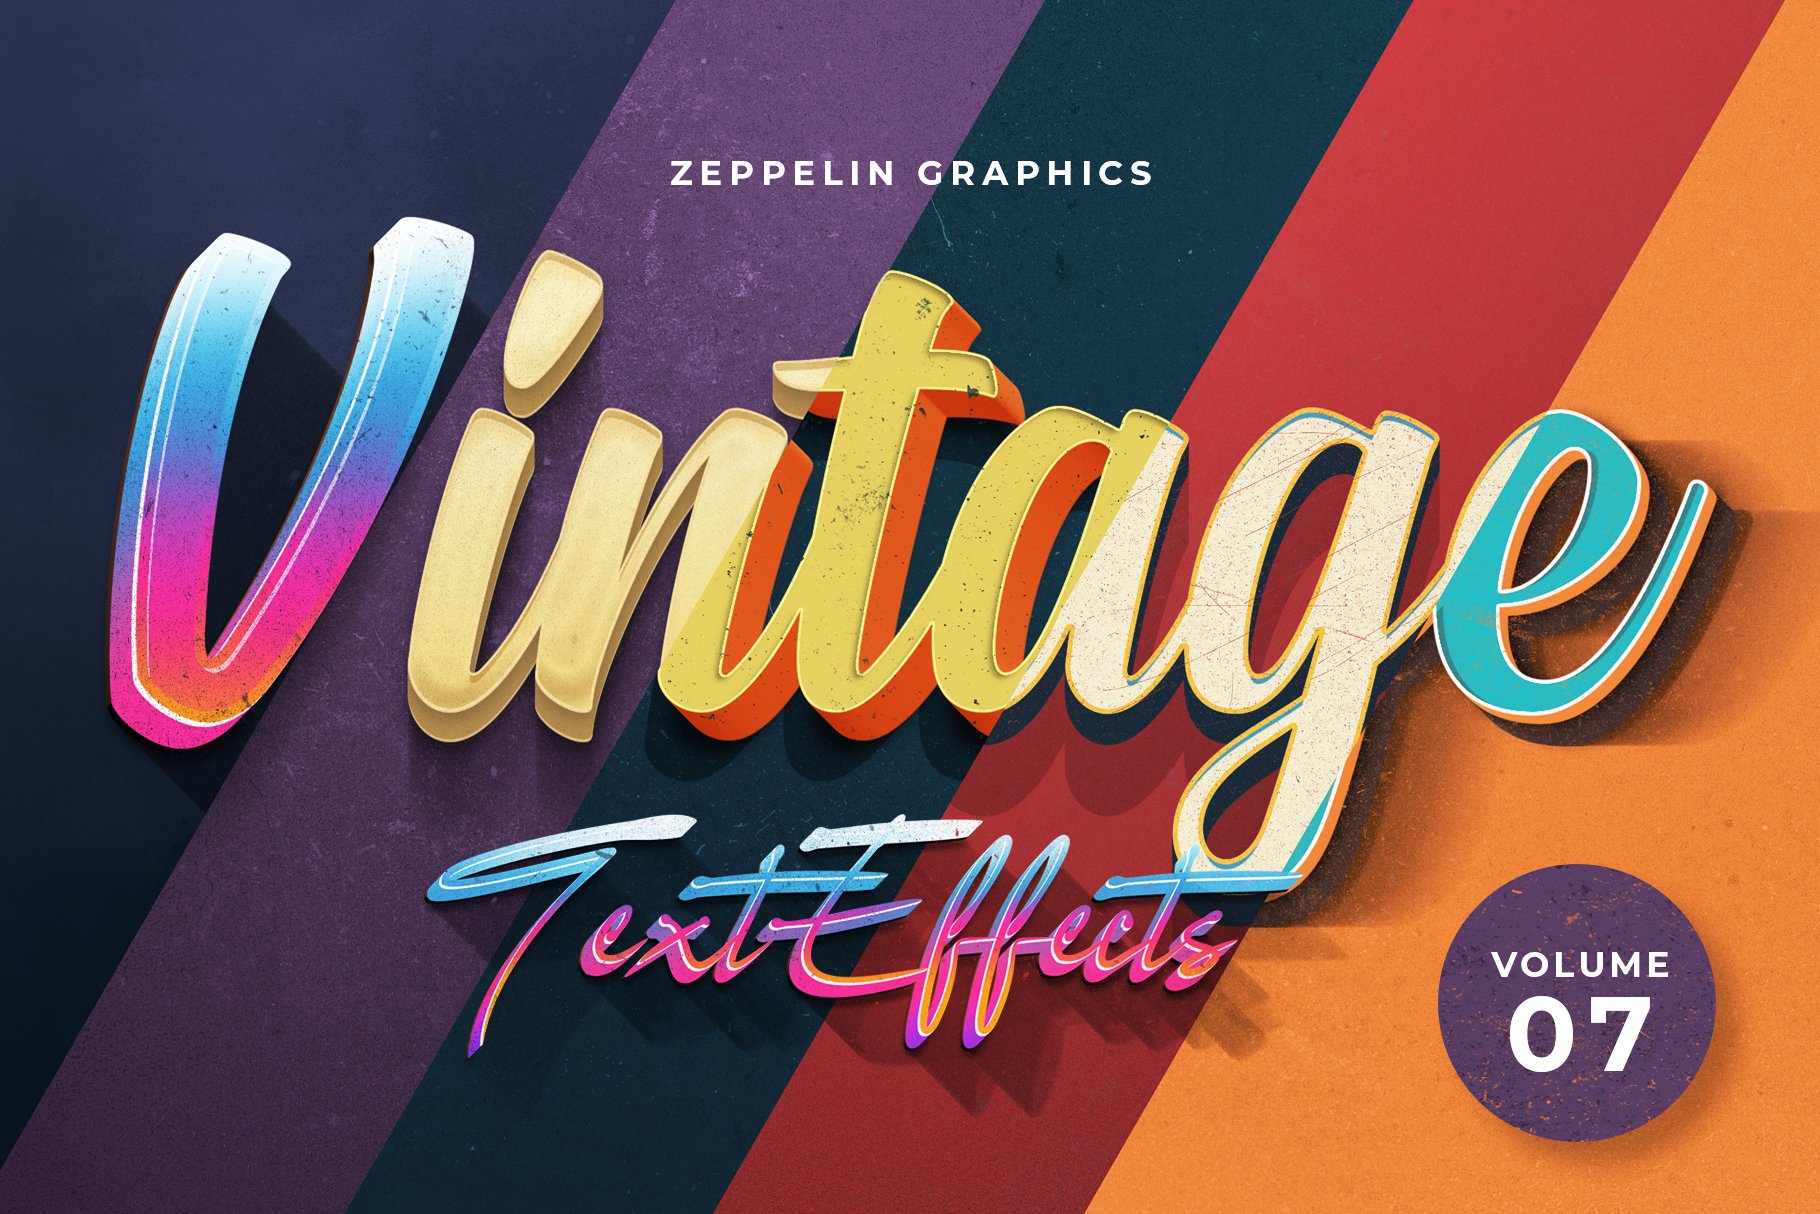 Vintage Text Effects Vol.7cover image.